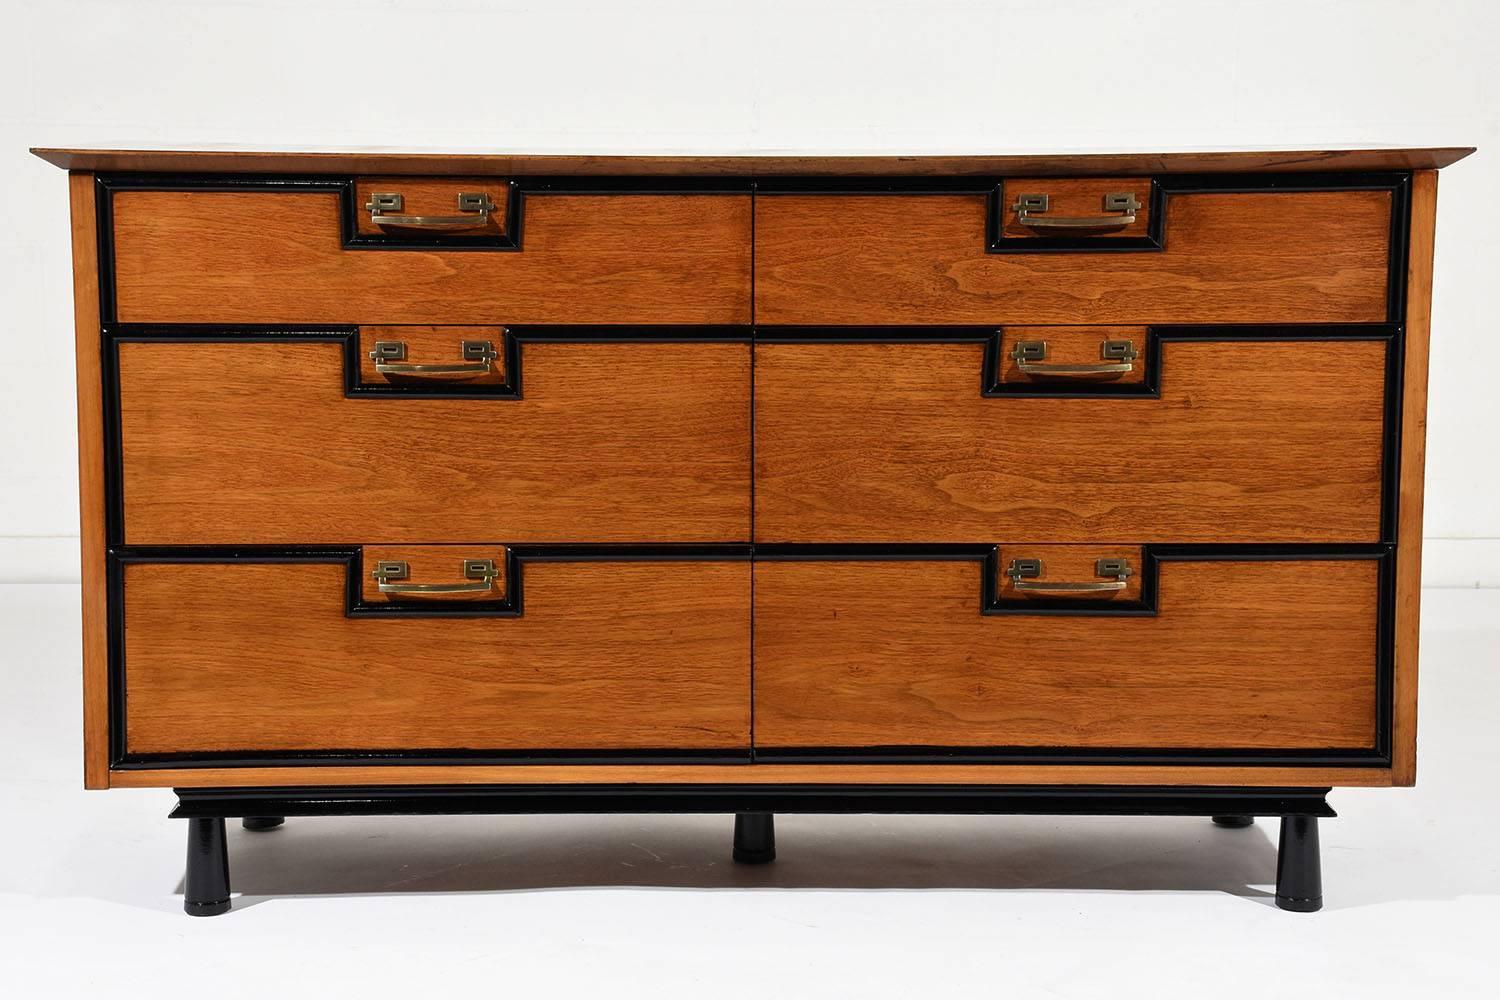 This 1960s Mid-Century Modern chest of drawers is made of walnut wood that has been stained in a rich walnut color with black accents and a lacquered finish. There are six drawers adorned with geometric black moulding accents and sleek brass